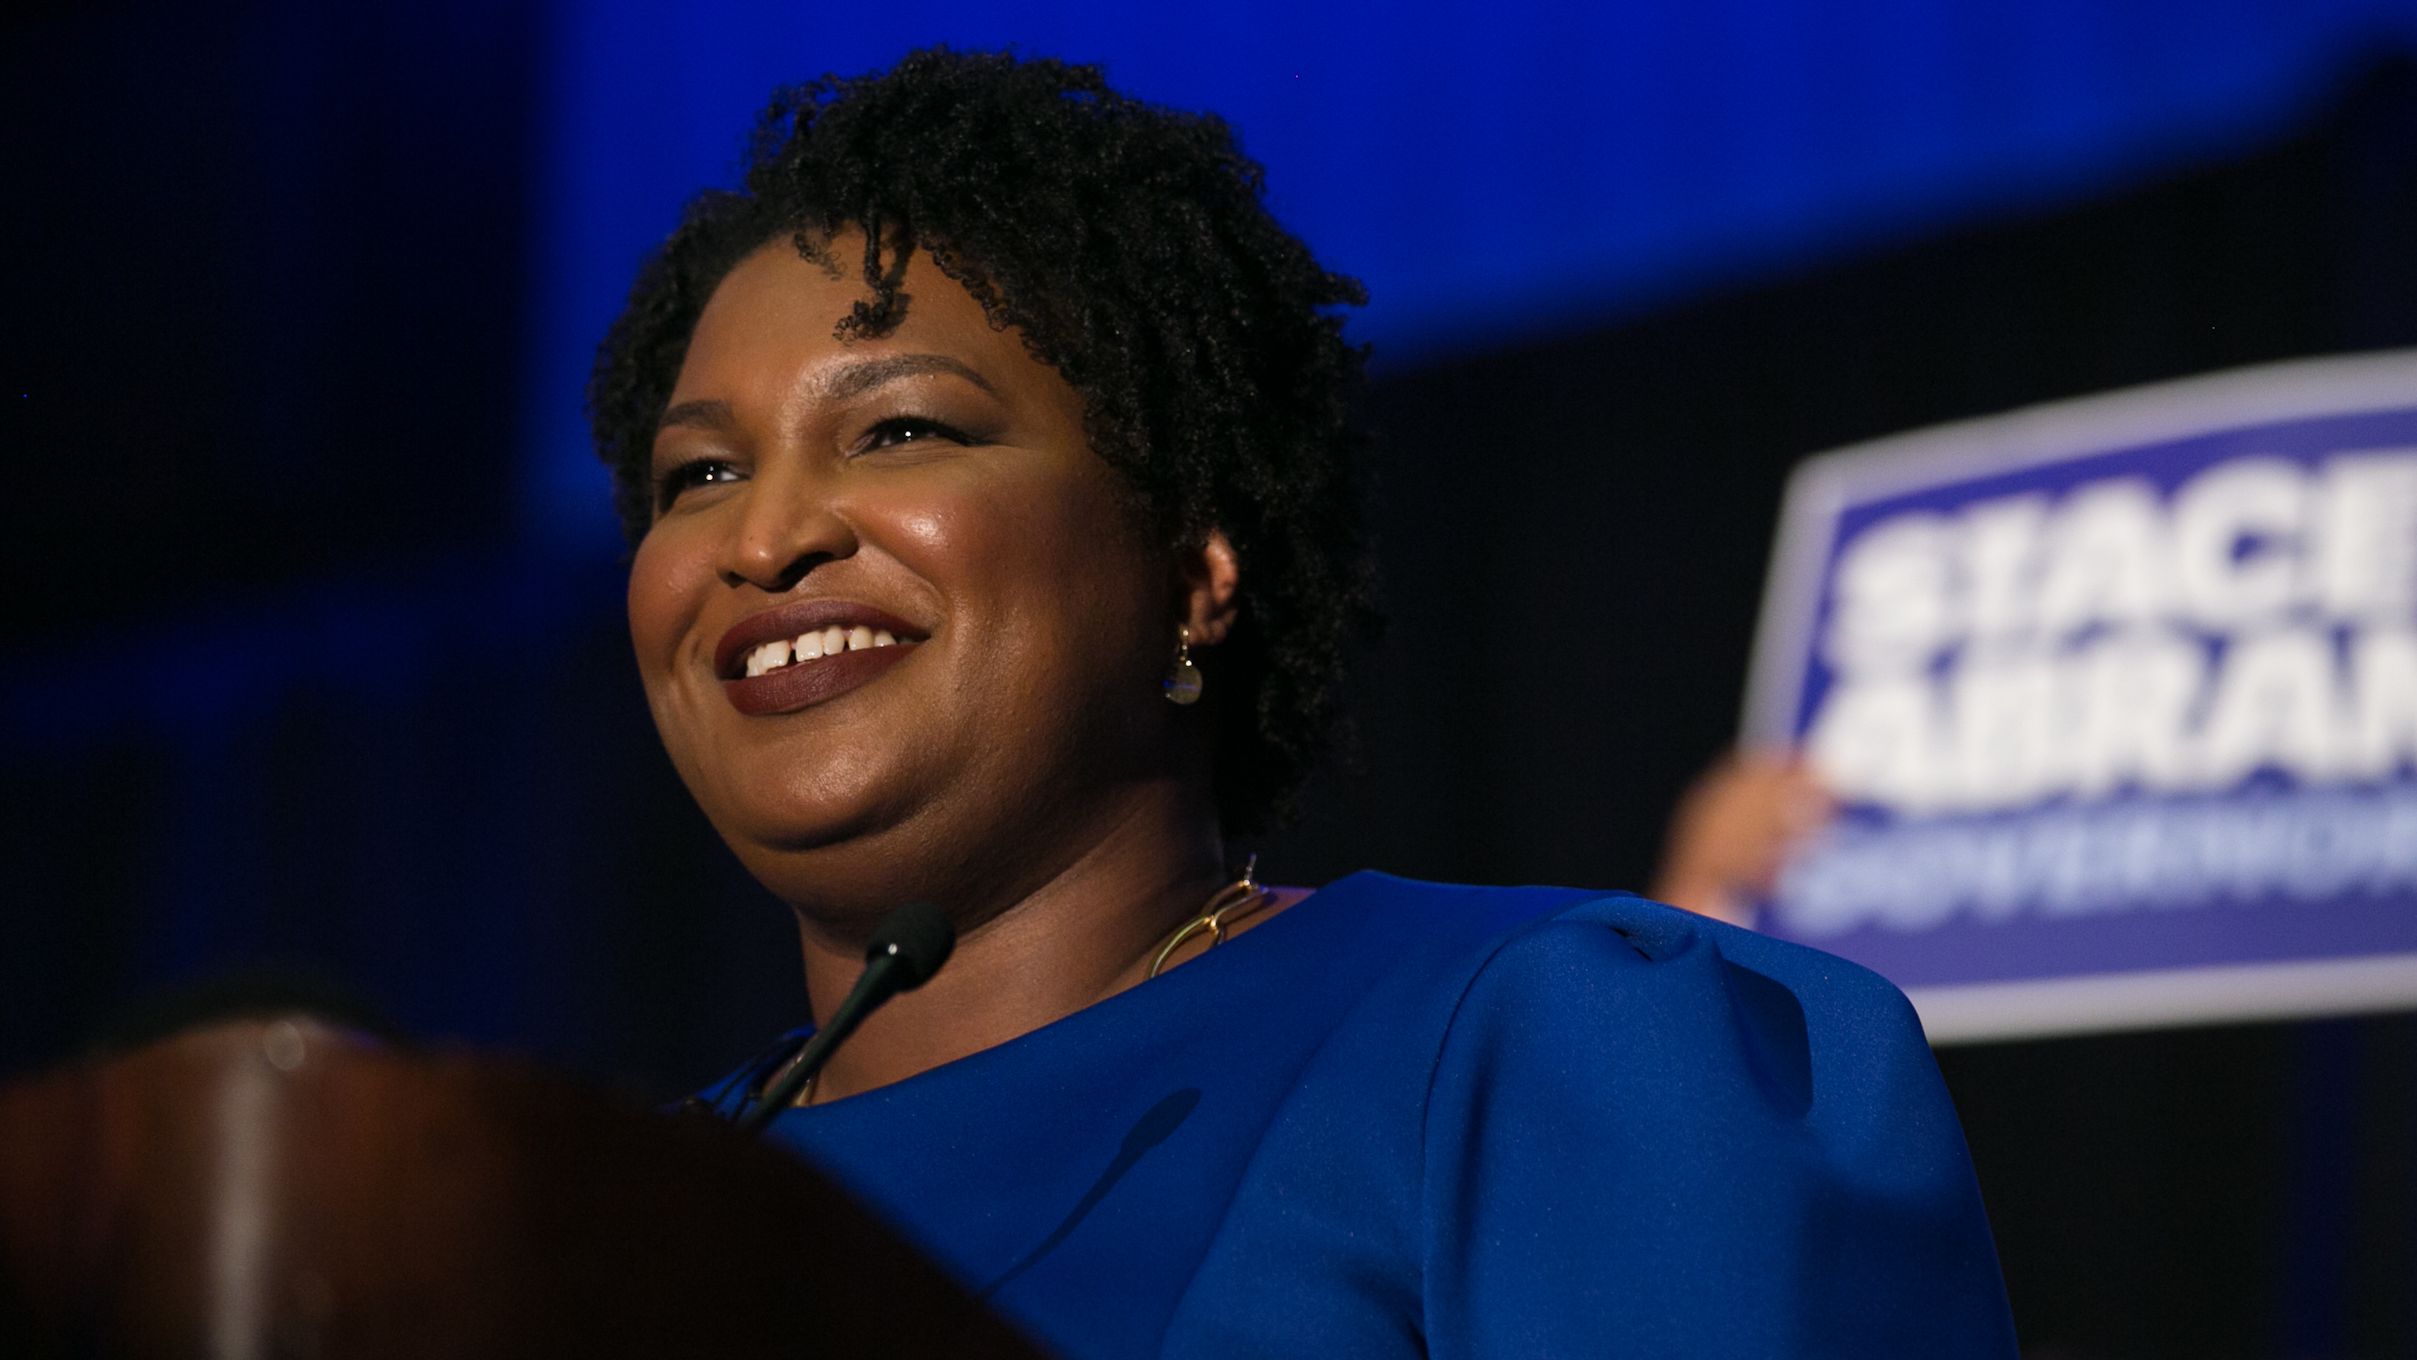 Georgia Democratic Gubernatorial candidate Stacey Abrams takes the stage to declare victory in the primary during an election night event on May 22, 2018 in Atlanta, Georgia. 